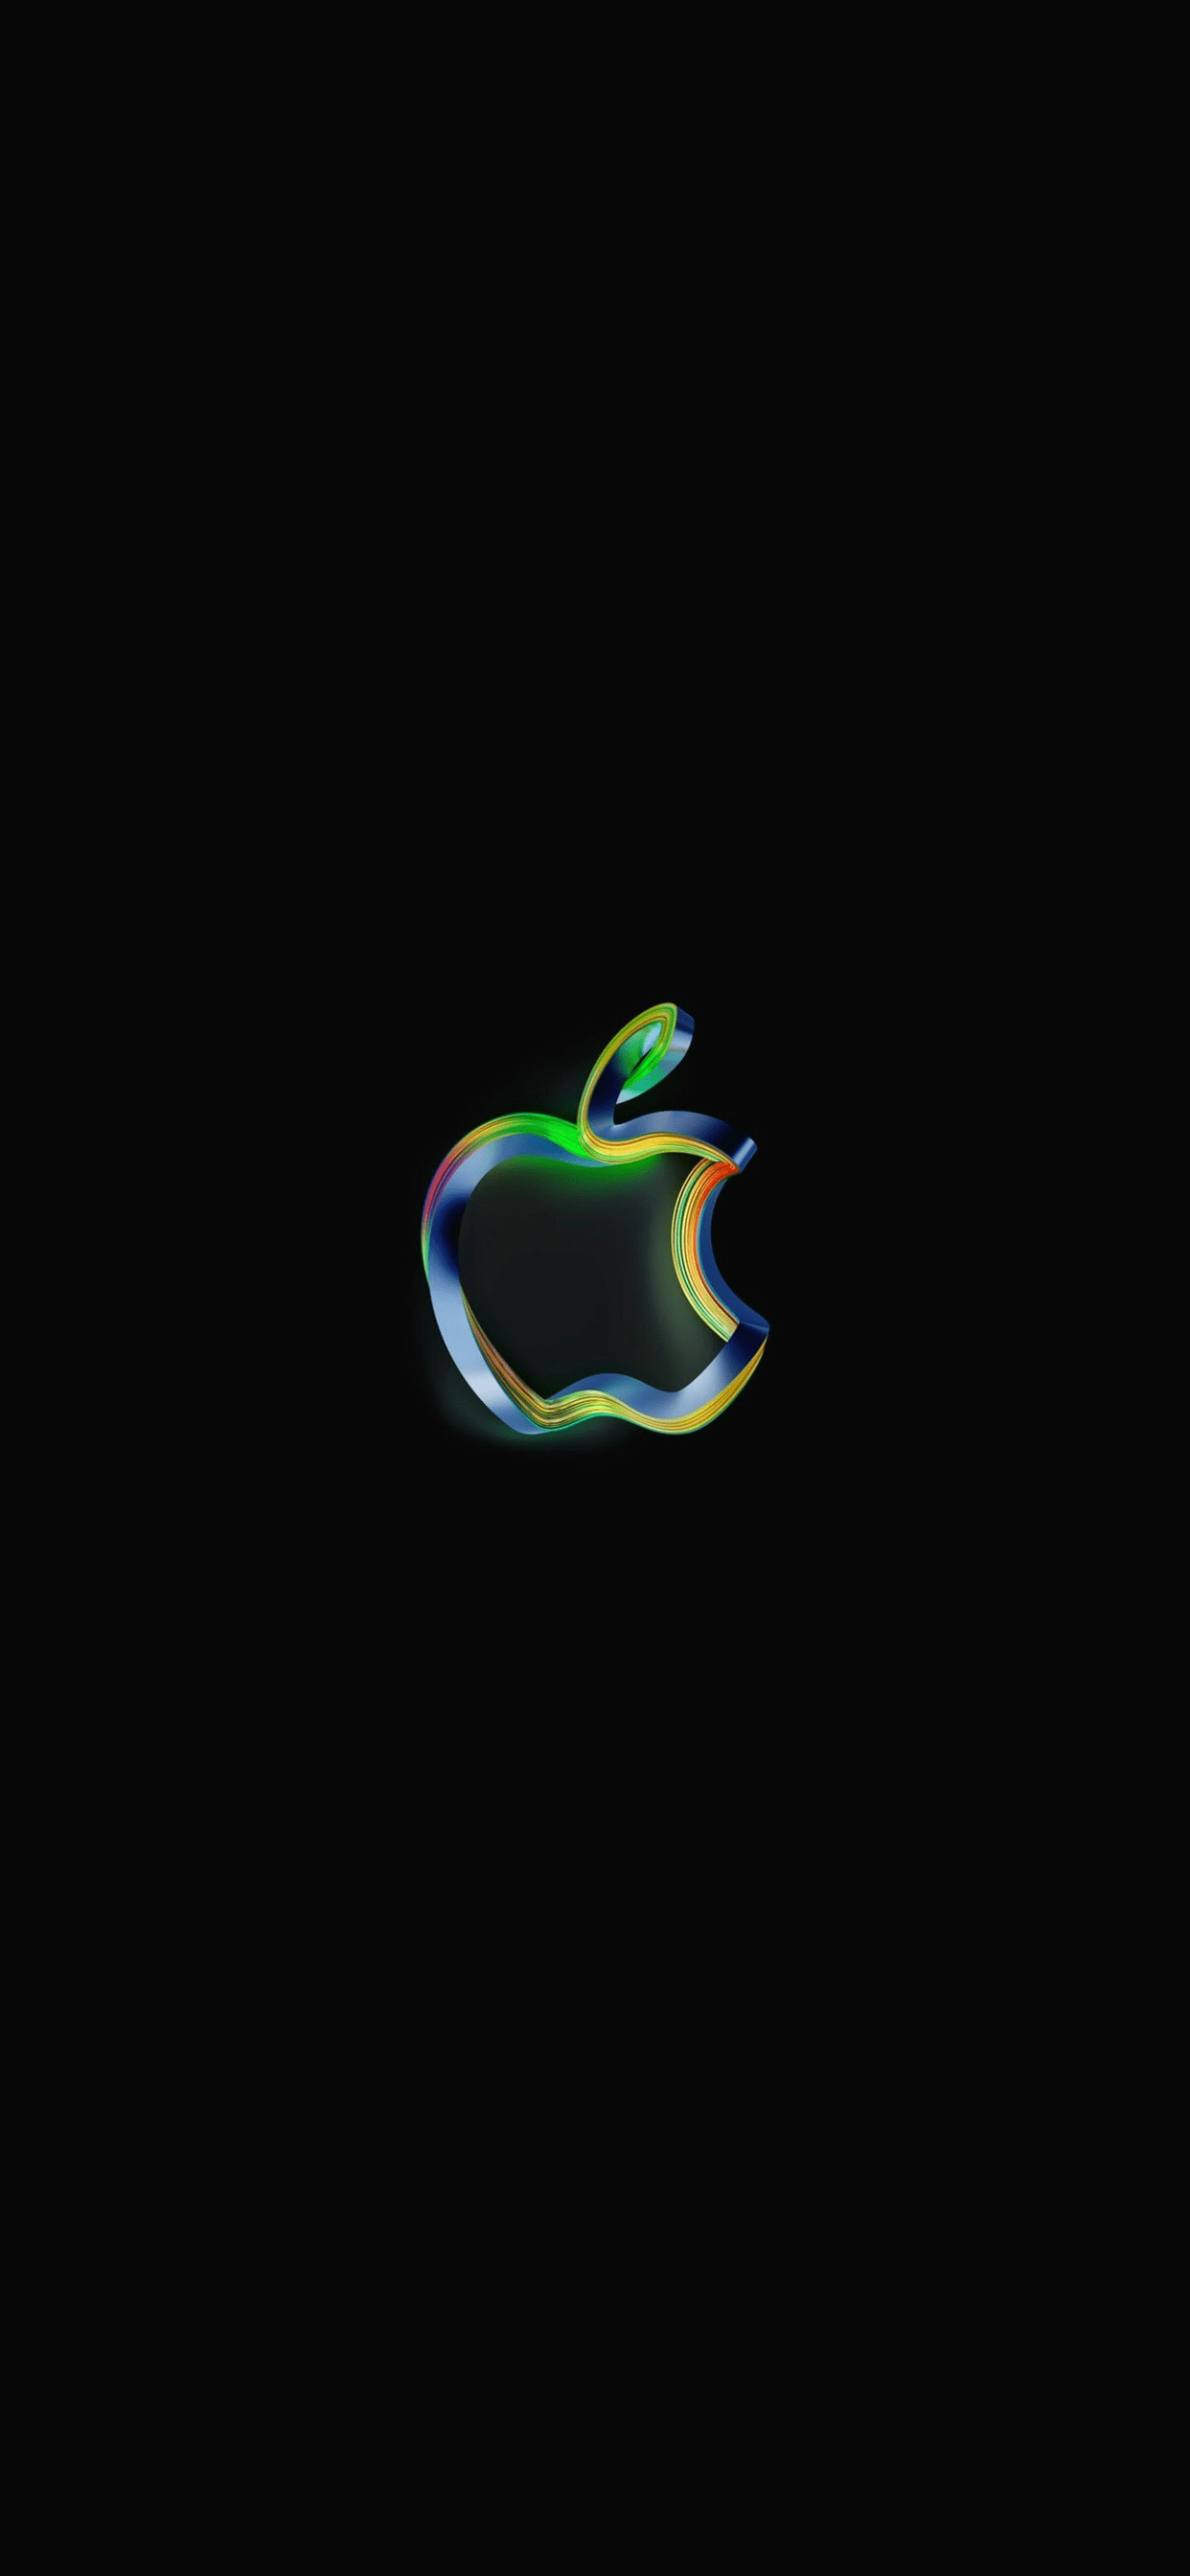 iPhone Logo Wallpapers - Top Free ...